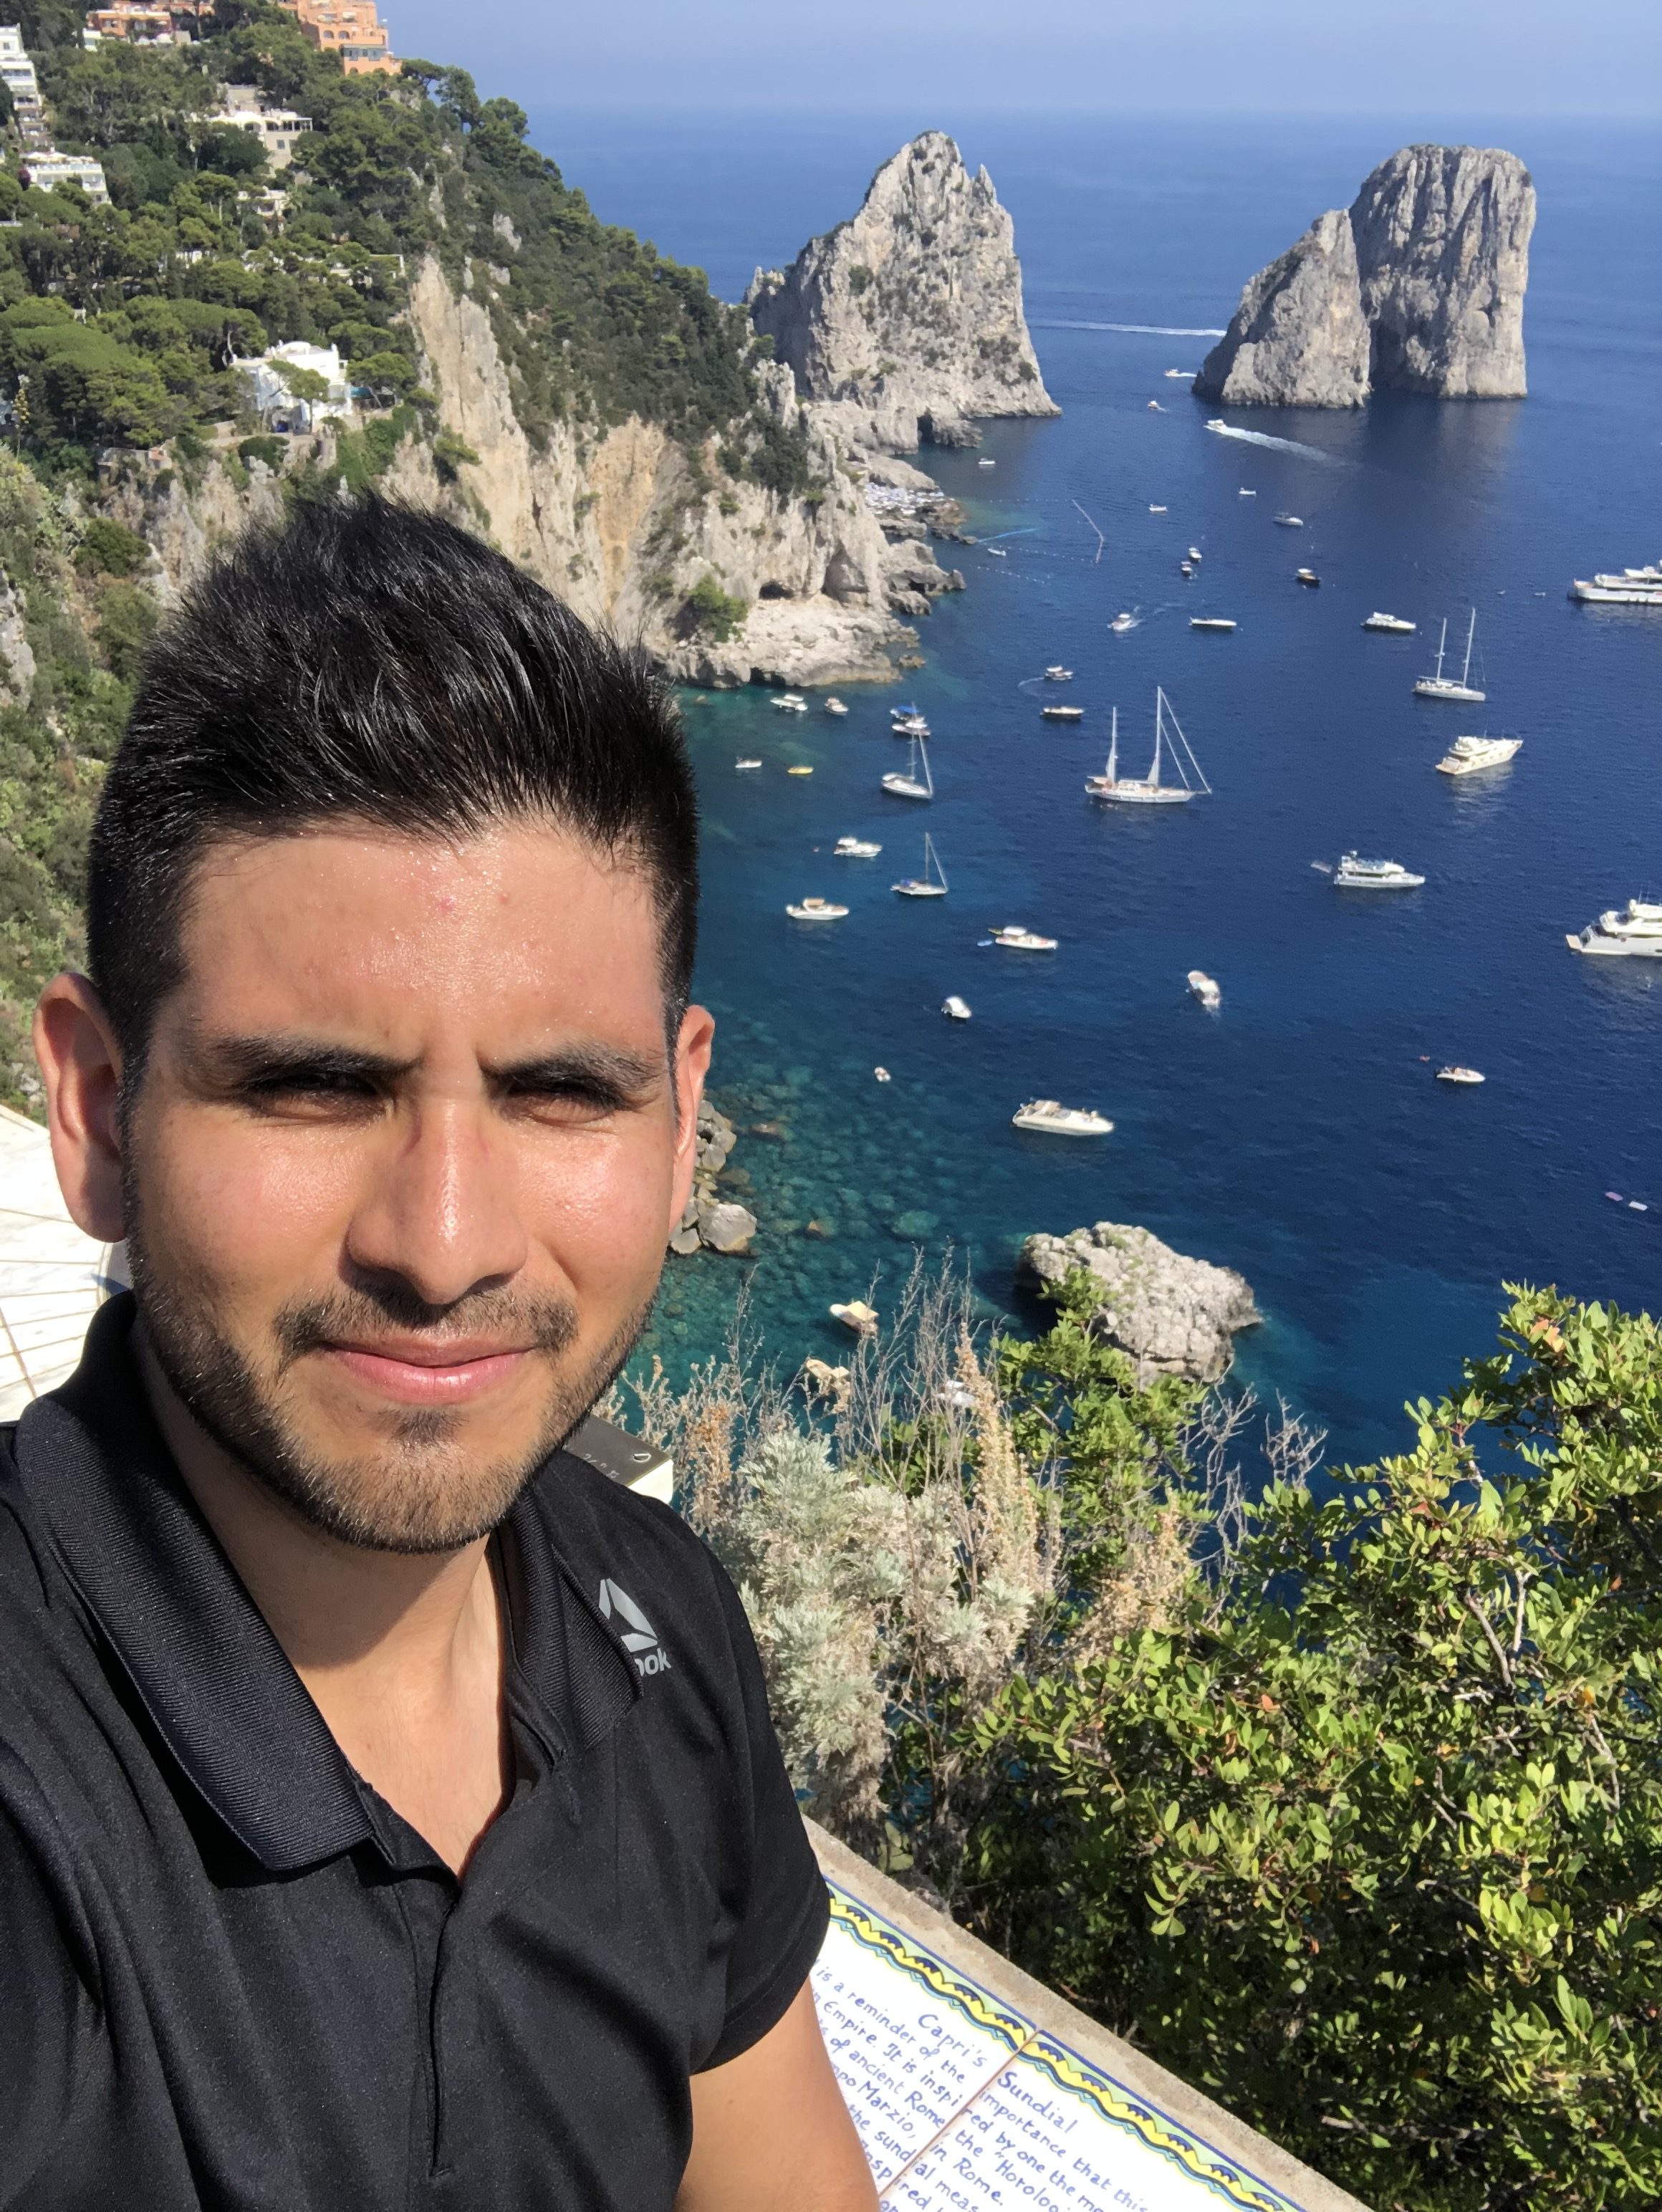 Juan Pablo Leon is standing on a cliff over a harbor filled with boats.